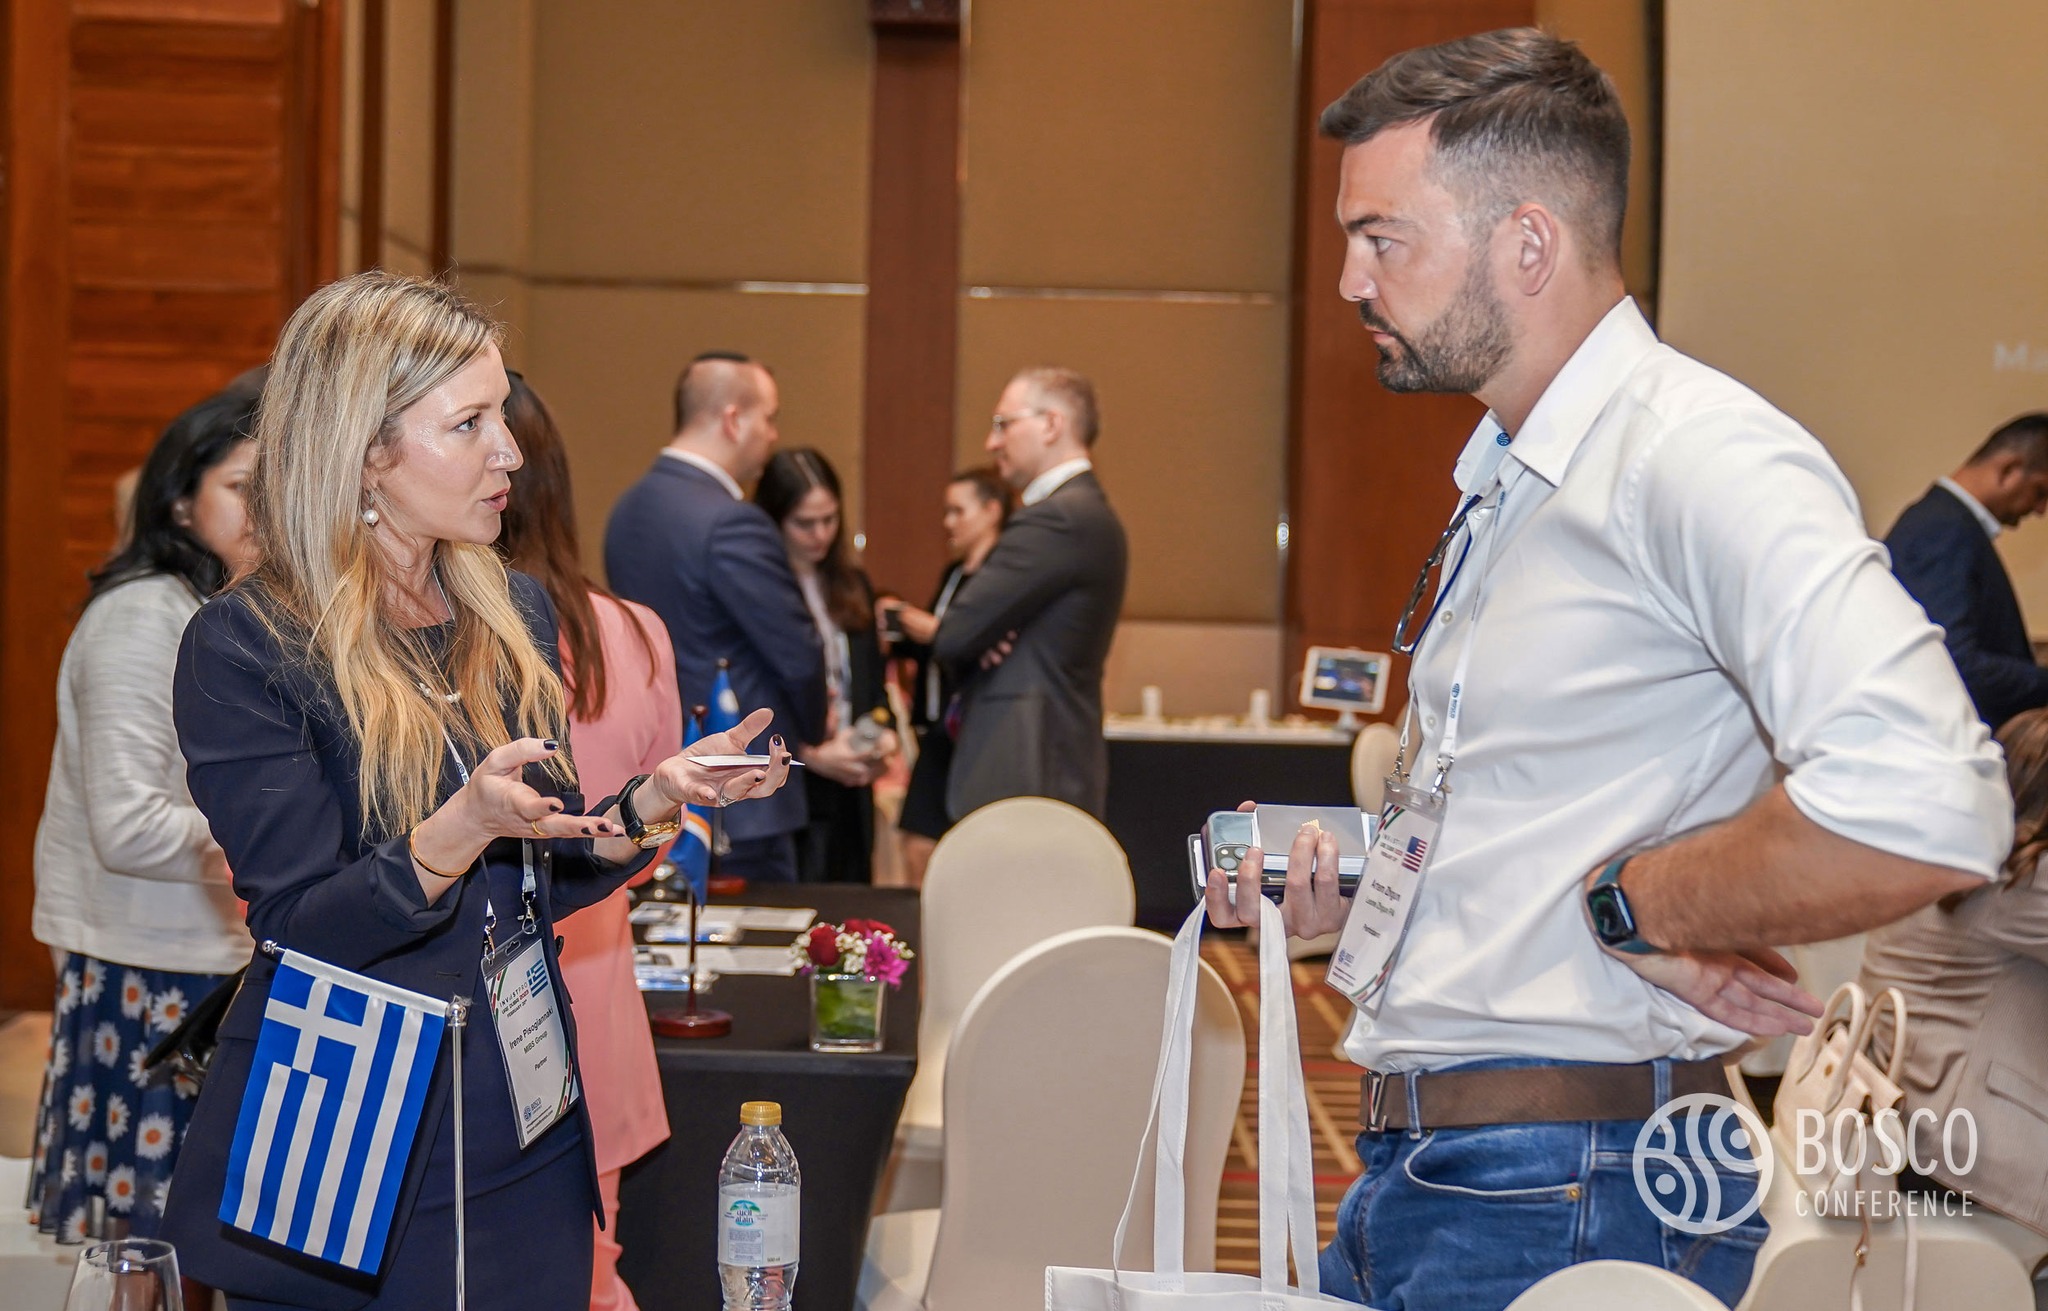 The Golden Visa at the epicentre of this year's InvestPro Dubai